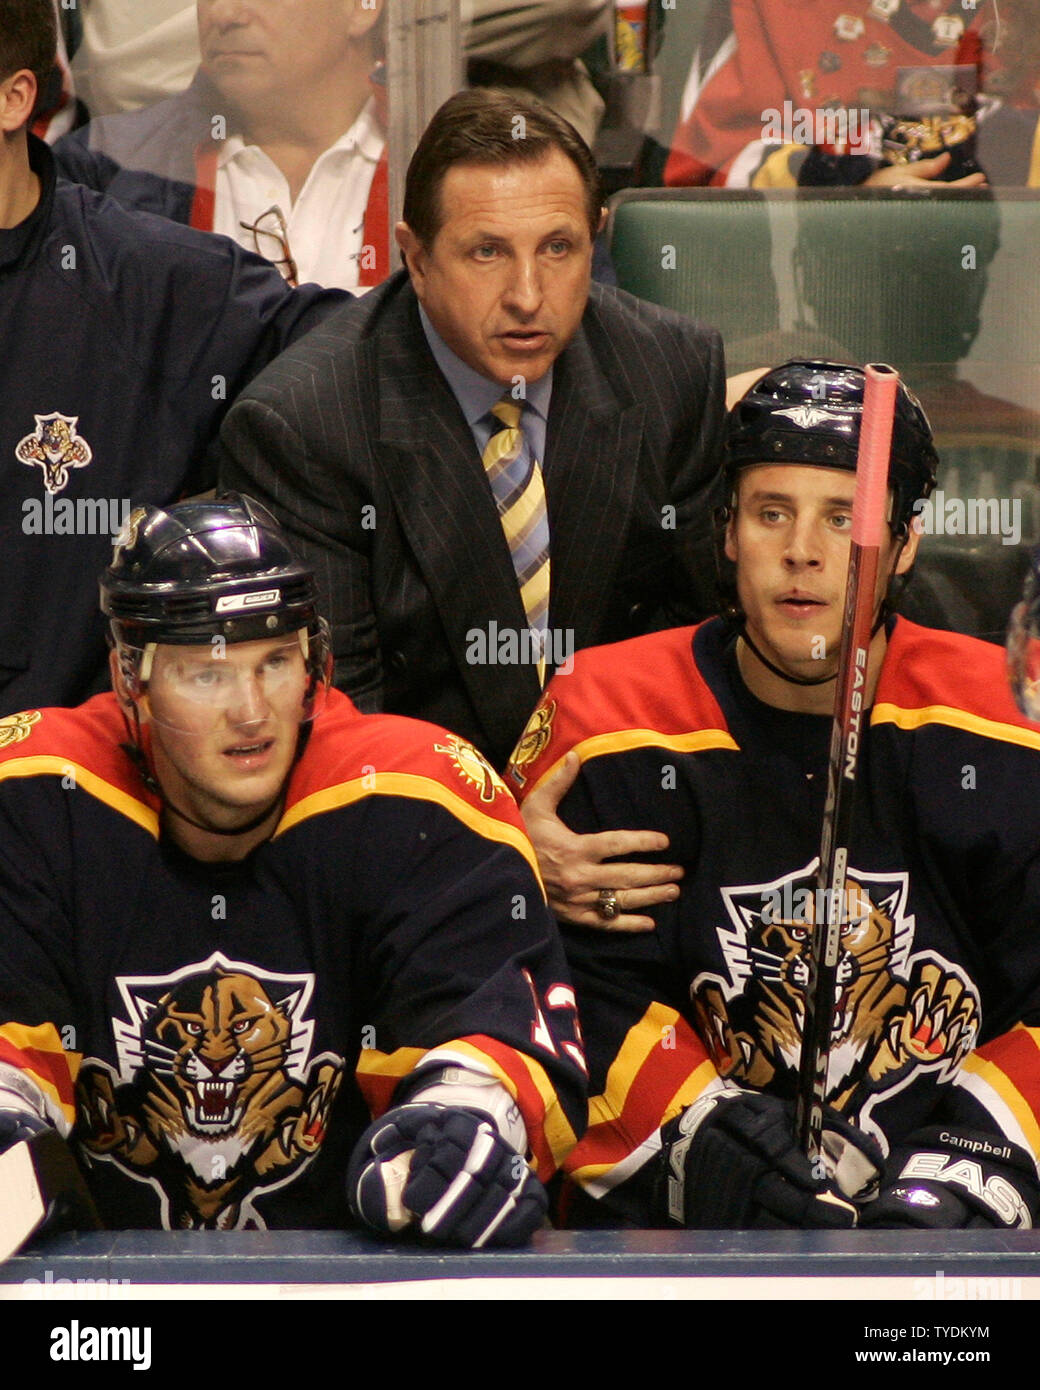 Florida Panthers head coach Jacques Martin watches second period NHL action against the Montreal Canadiens at the Bank Atlantic Center in Sunrise, Florida on November 16, 2006. (UPI Photo/Michael Bush) Stock Photo